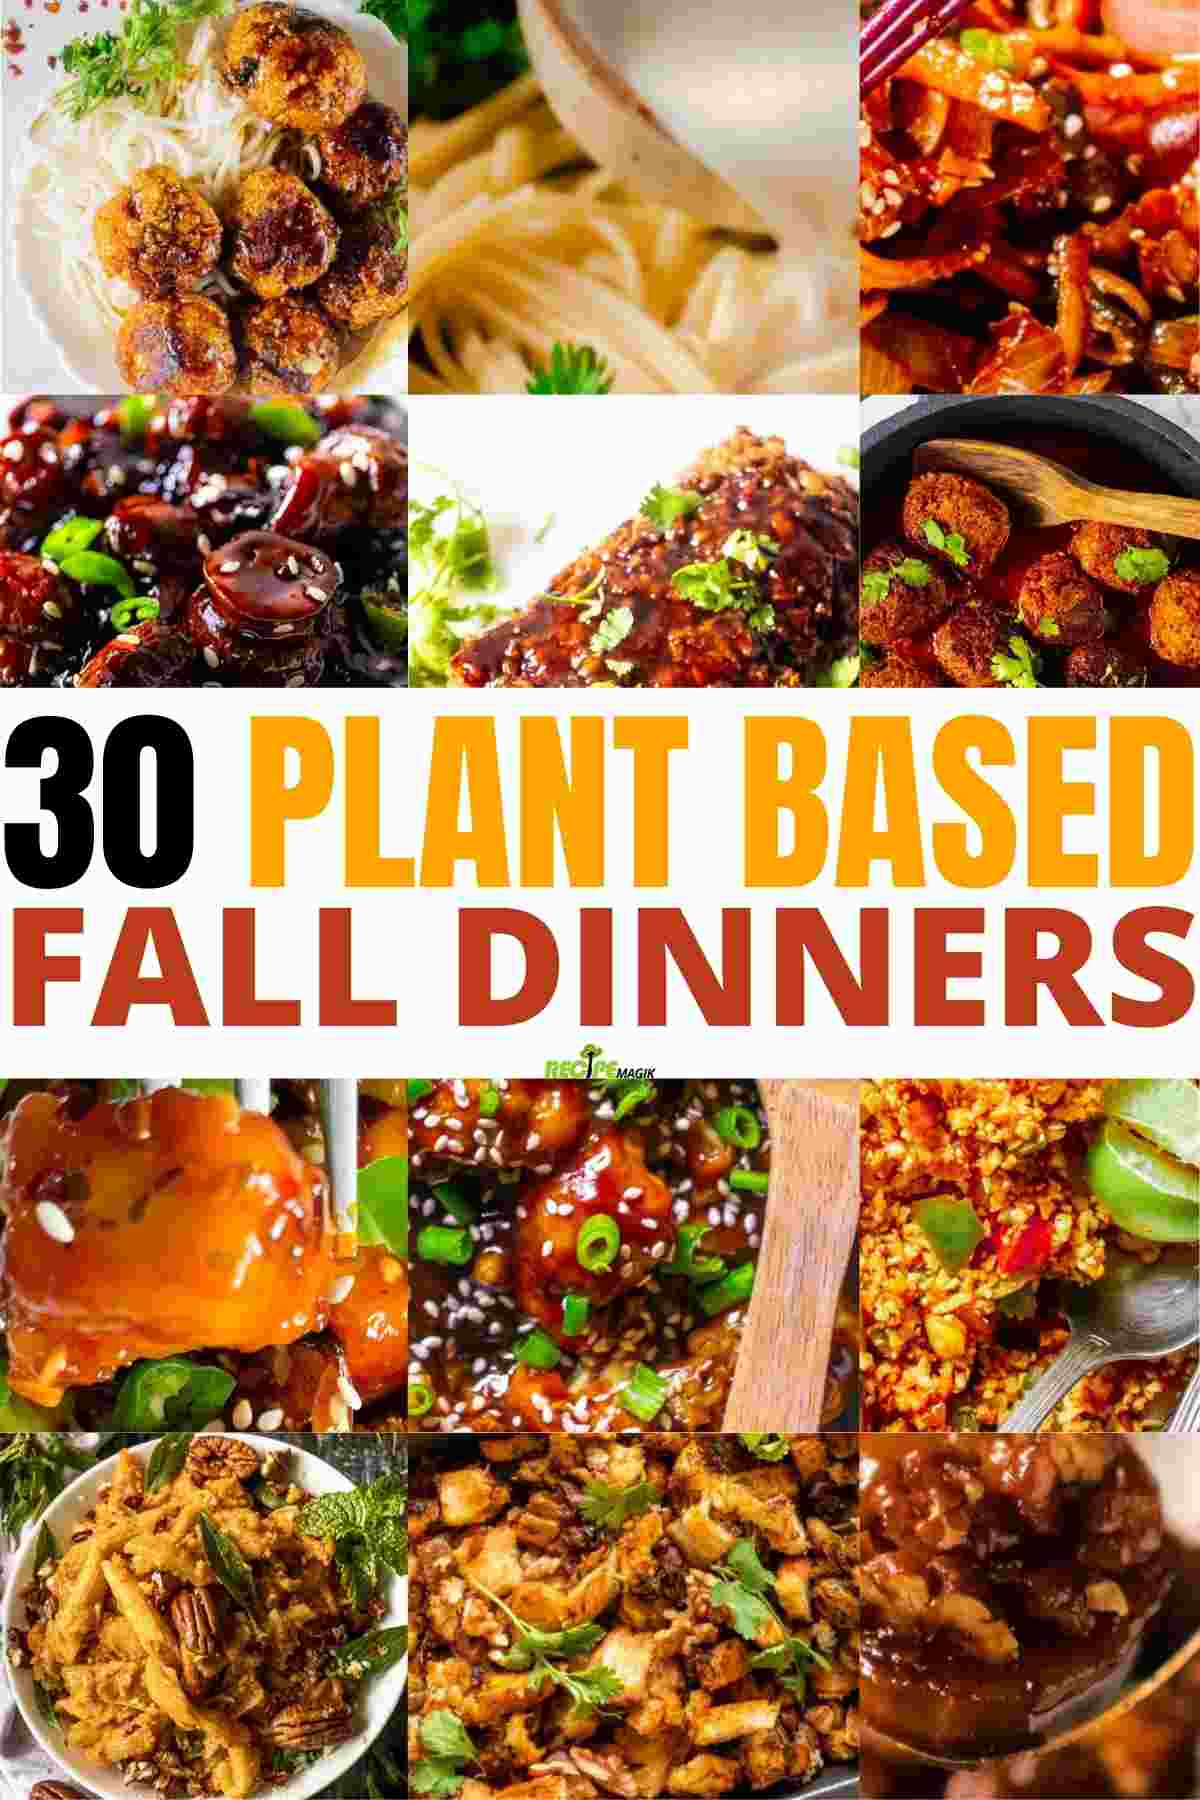 Plant Based Fall Dinners Collage Image